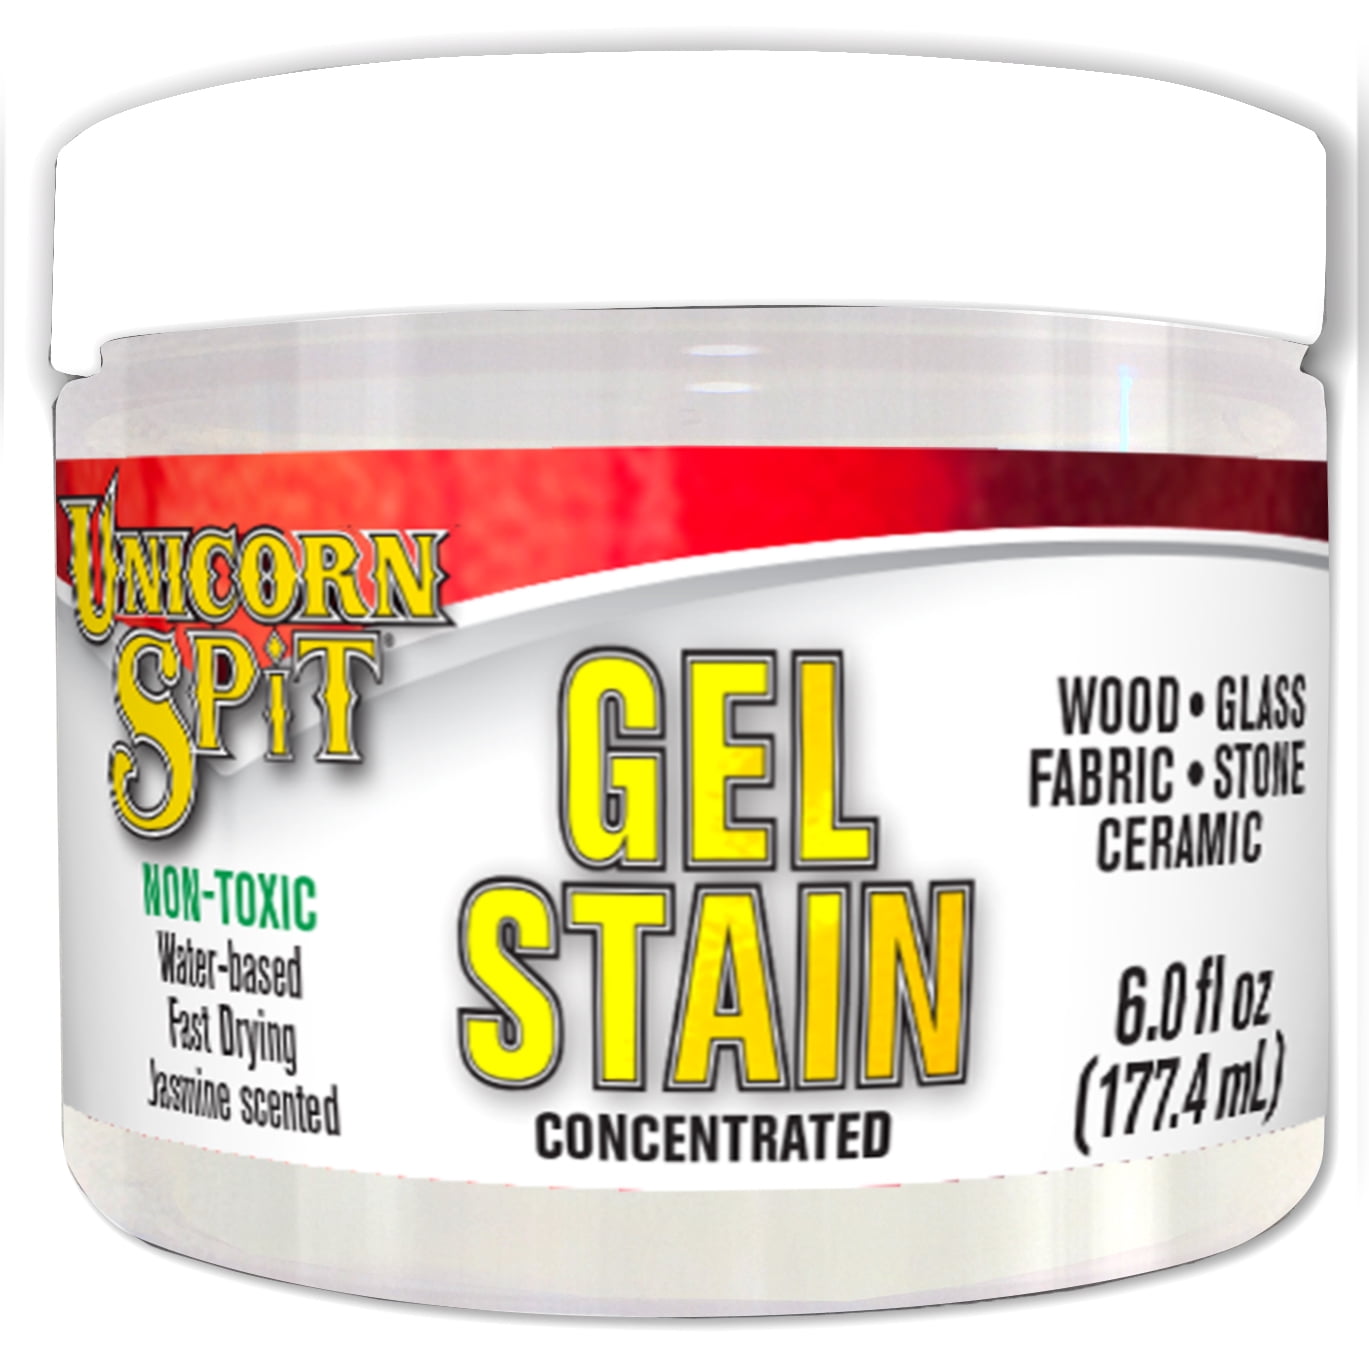 Unicorn Spit Gel Stain & Glaze, 4 oz by Eclectic Products in Midnight's Blackness | Michaels